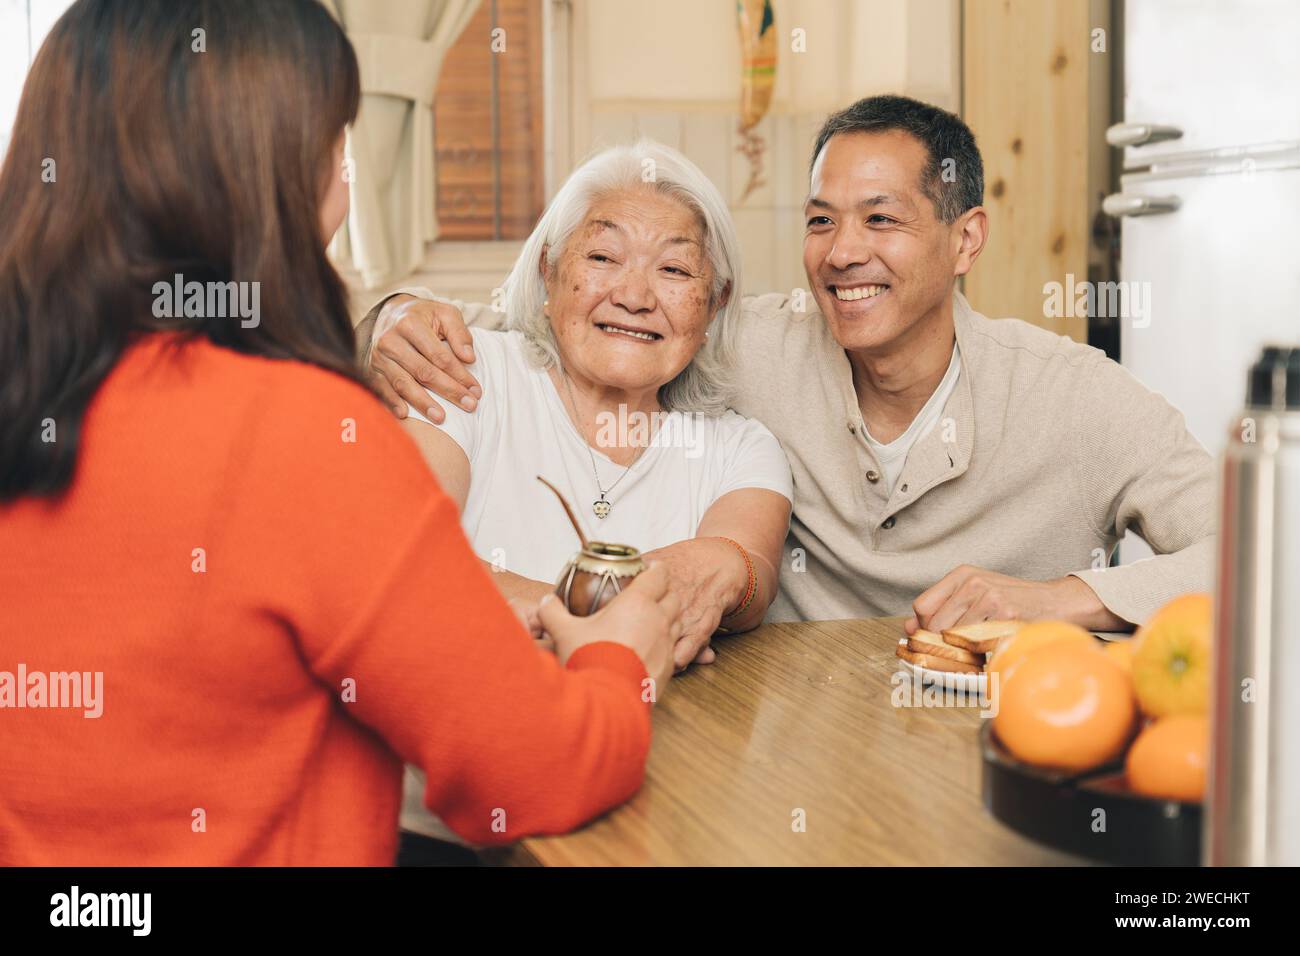 Happy adult children sharing with their elderly Japanese mother drinking mate in the kitchen. Argentine-Japanese family. Stock Photo